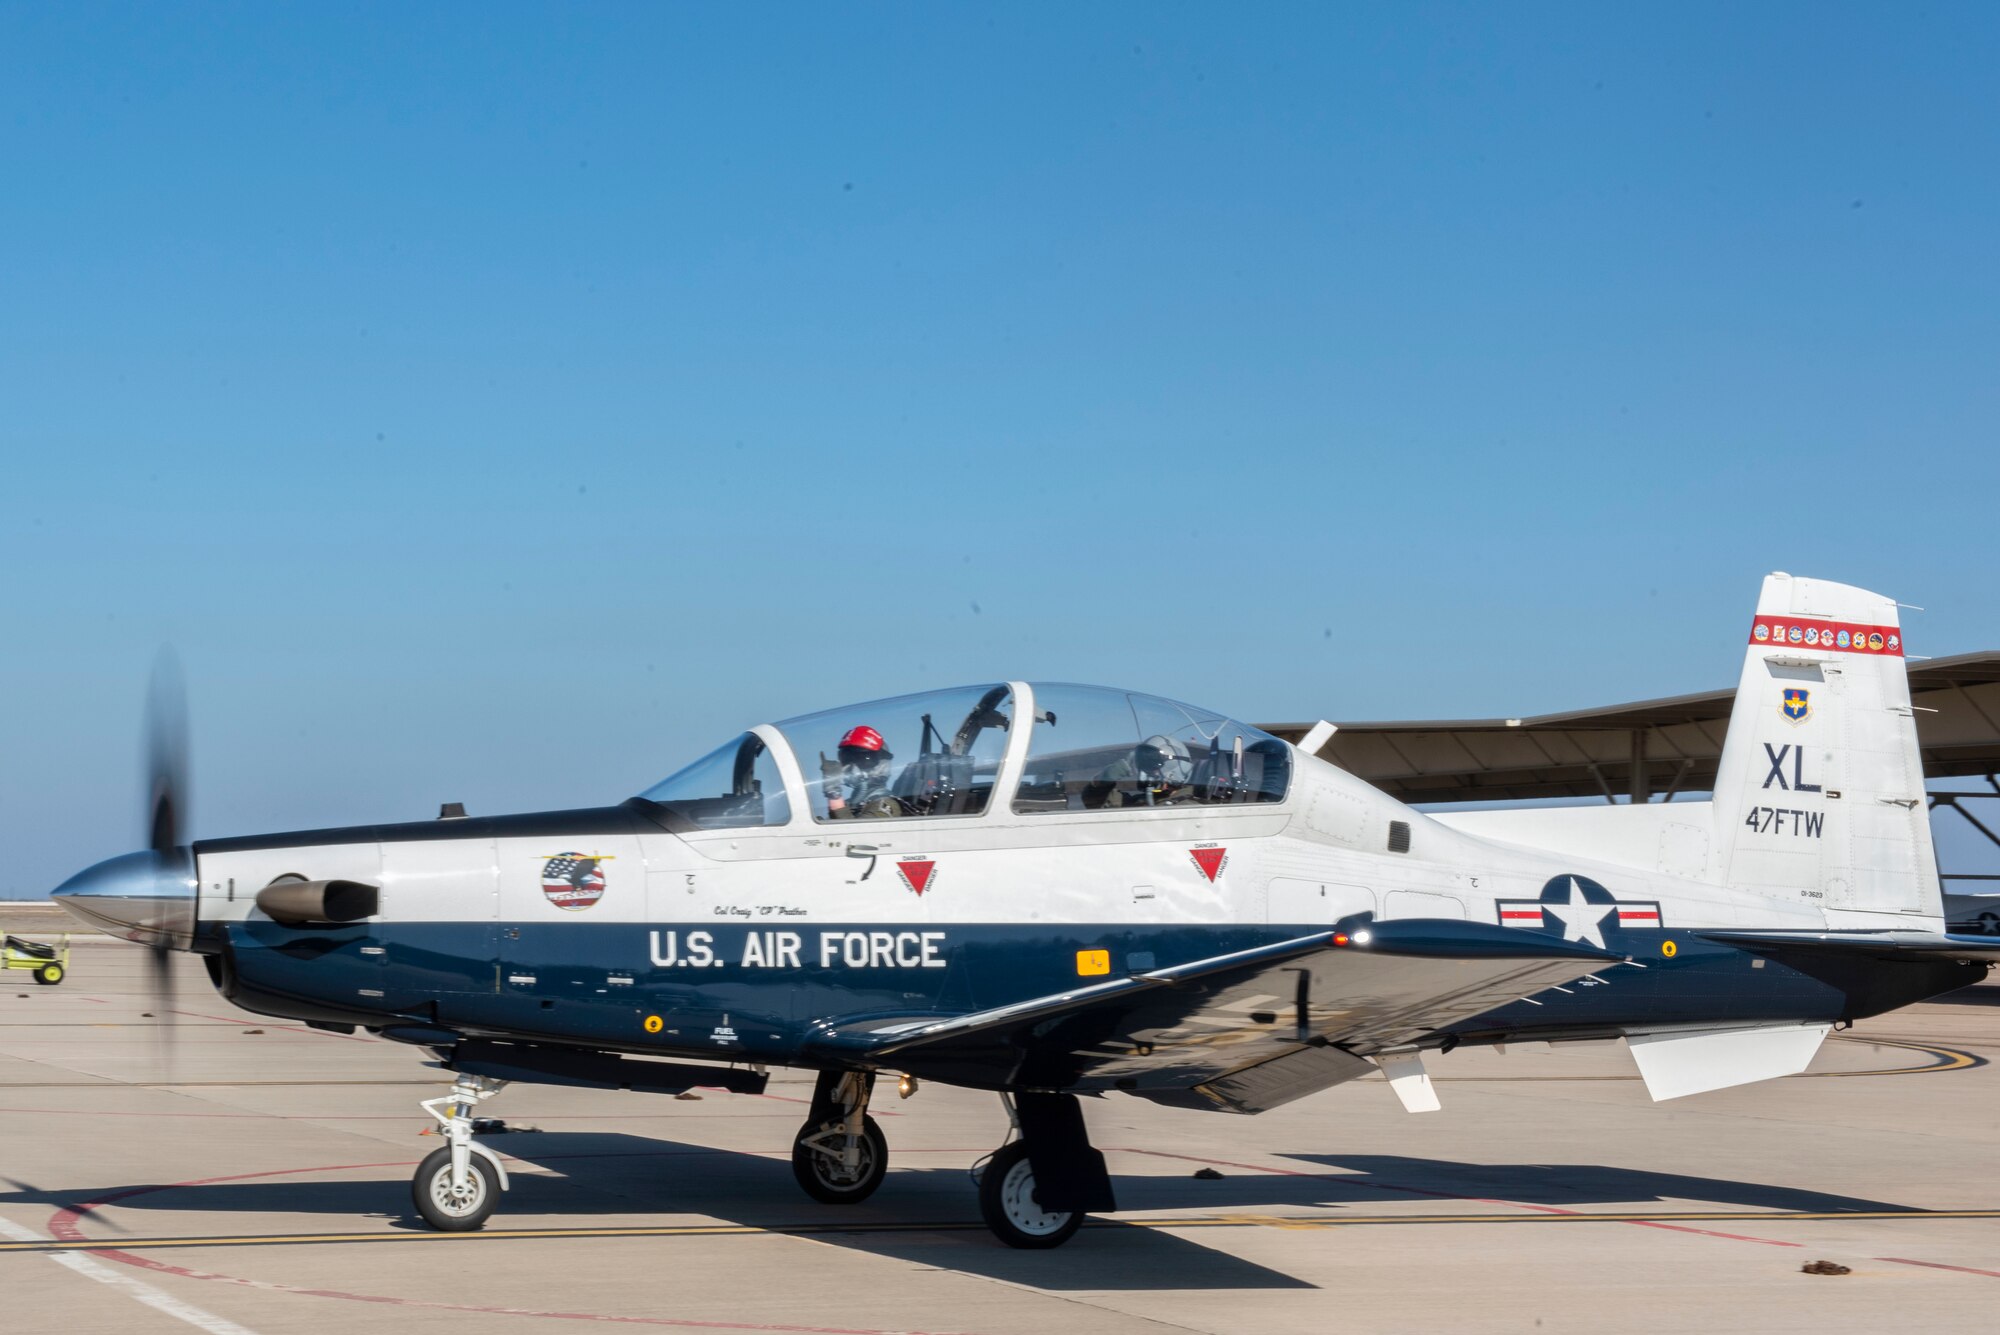 Maj. Gen. William Spangenthal, Air Education and Training Command deputy commander, steps to his T-6A Texan II for a training sortie at Laughlin Air Force Base, Texas, Feb. 9, 2021. The T-6 is the first aircraft student pilots fly, before specializing in either the T-1 Jayhawk or the T-38C Talon. (U.S. Air Force photo by Airman 1st Class David Phaff)